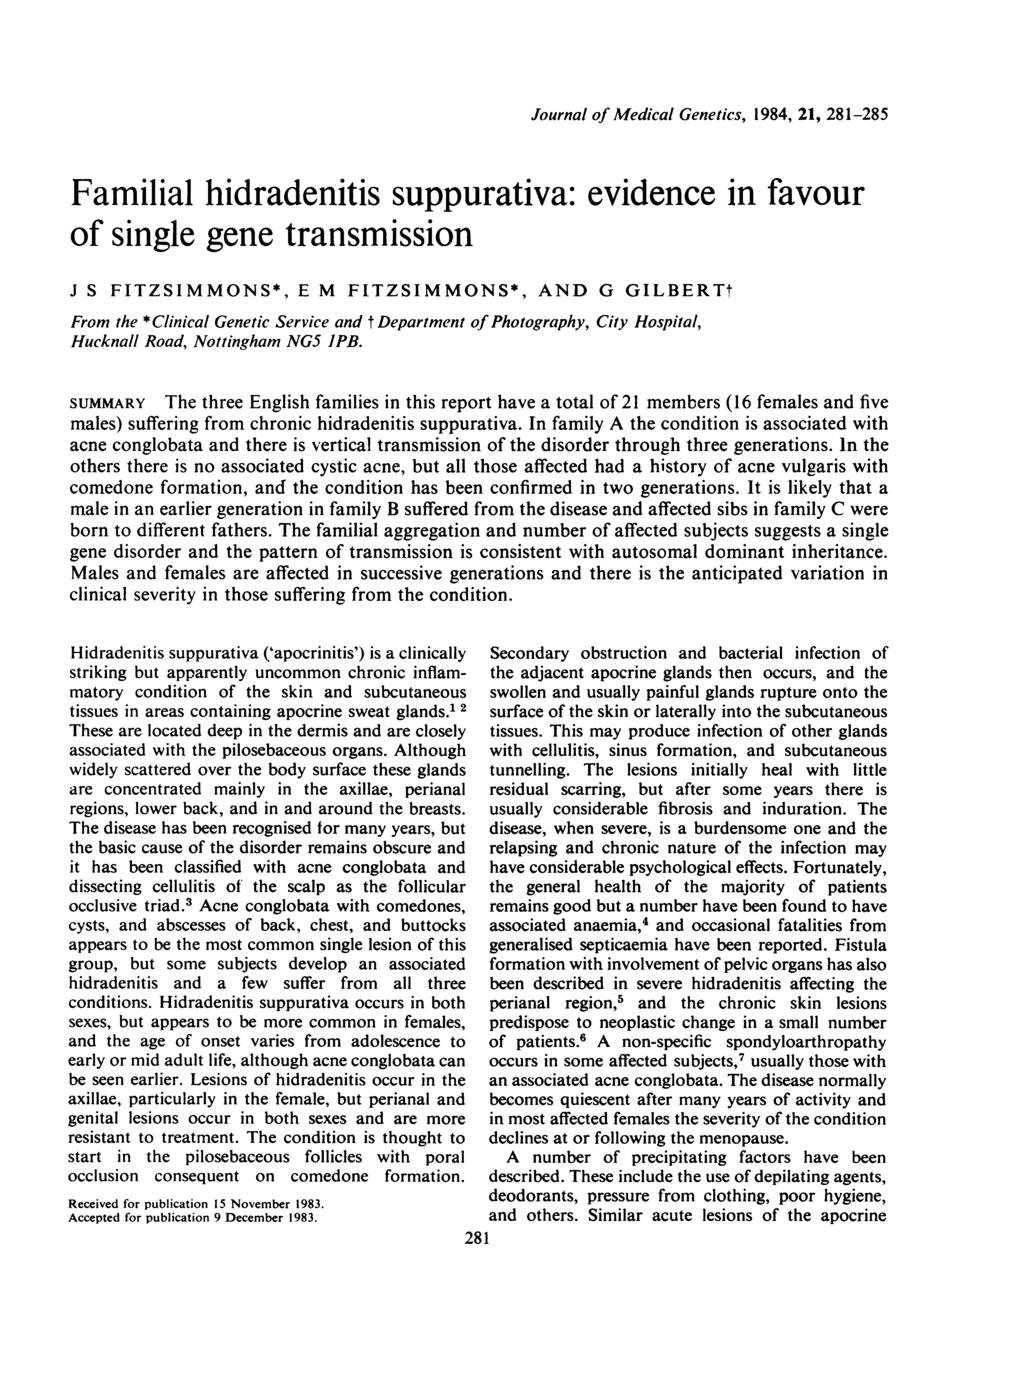 Journal of Medical Genetics, 1984, 21, 281-285 Familial hidradenitis suppurativa: evidence in favour of single gene transmission J S FITZSIMMONS*, E M FITZSIMMONS*, AND G GILBERTt From the *Clinical